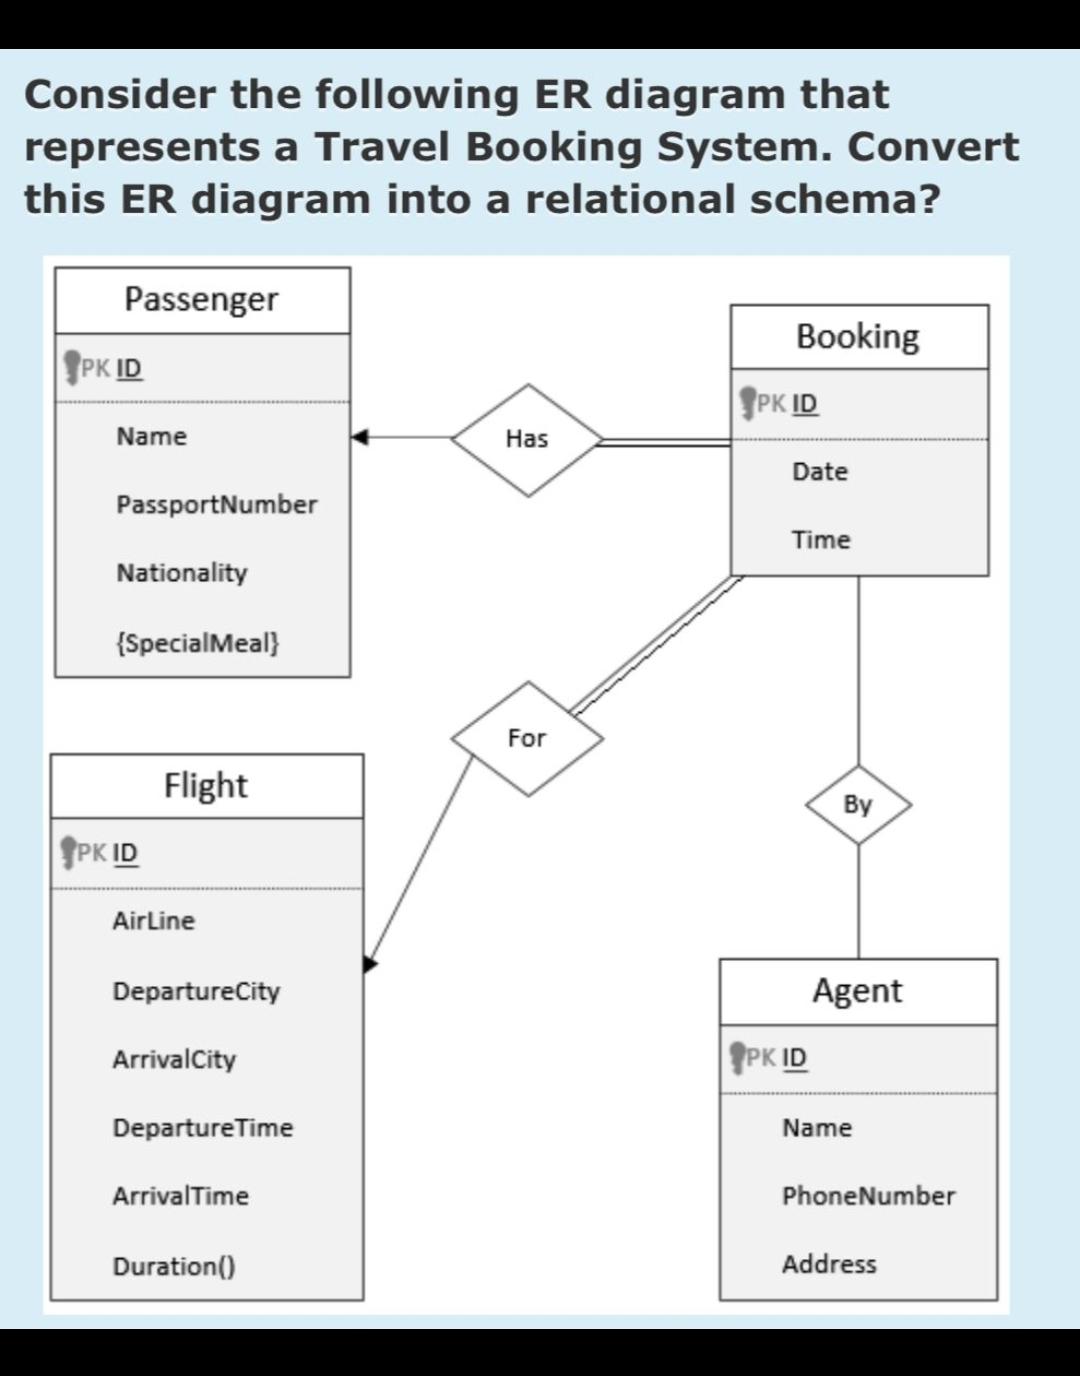 Consider the following ER diagram that represents a Travel Booking System. Convert this ER diagram into a